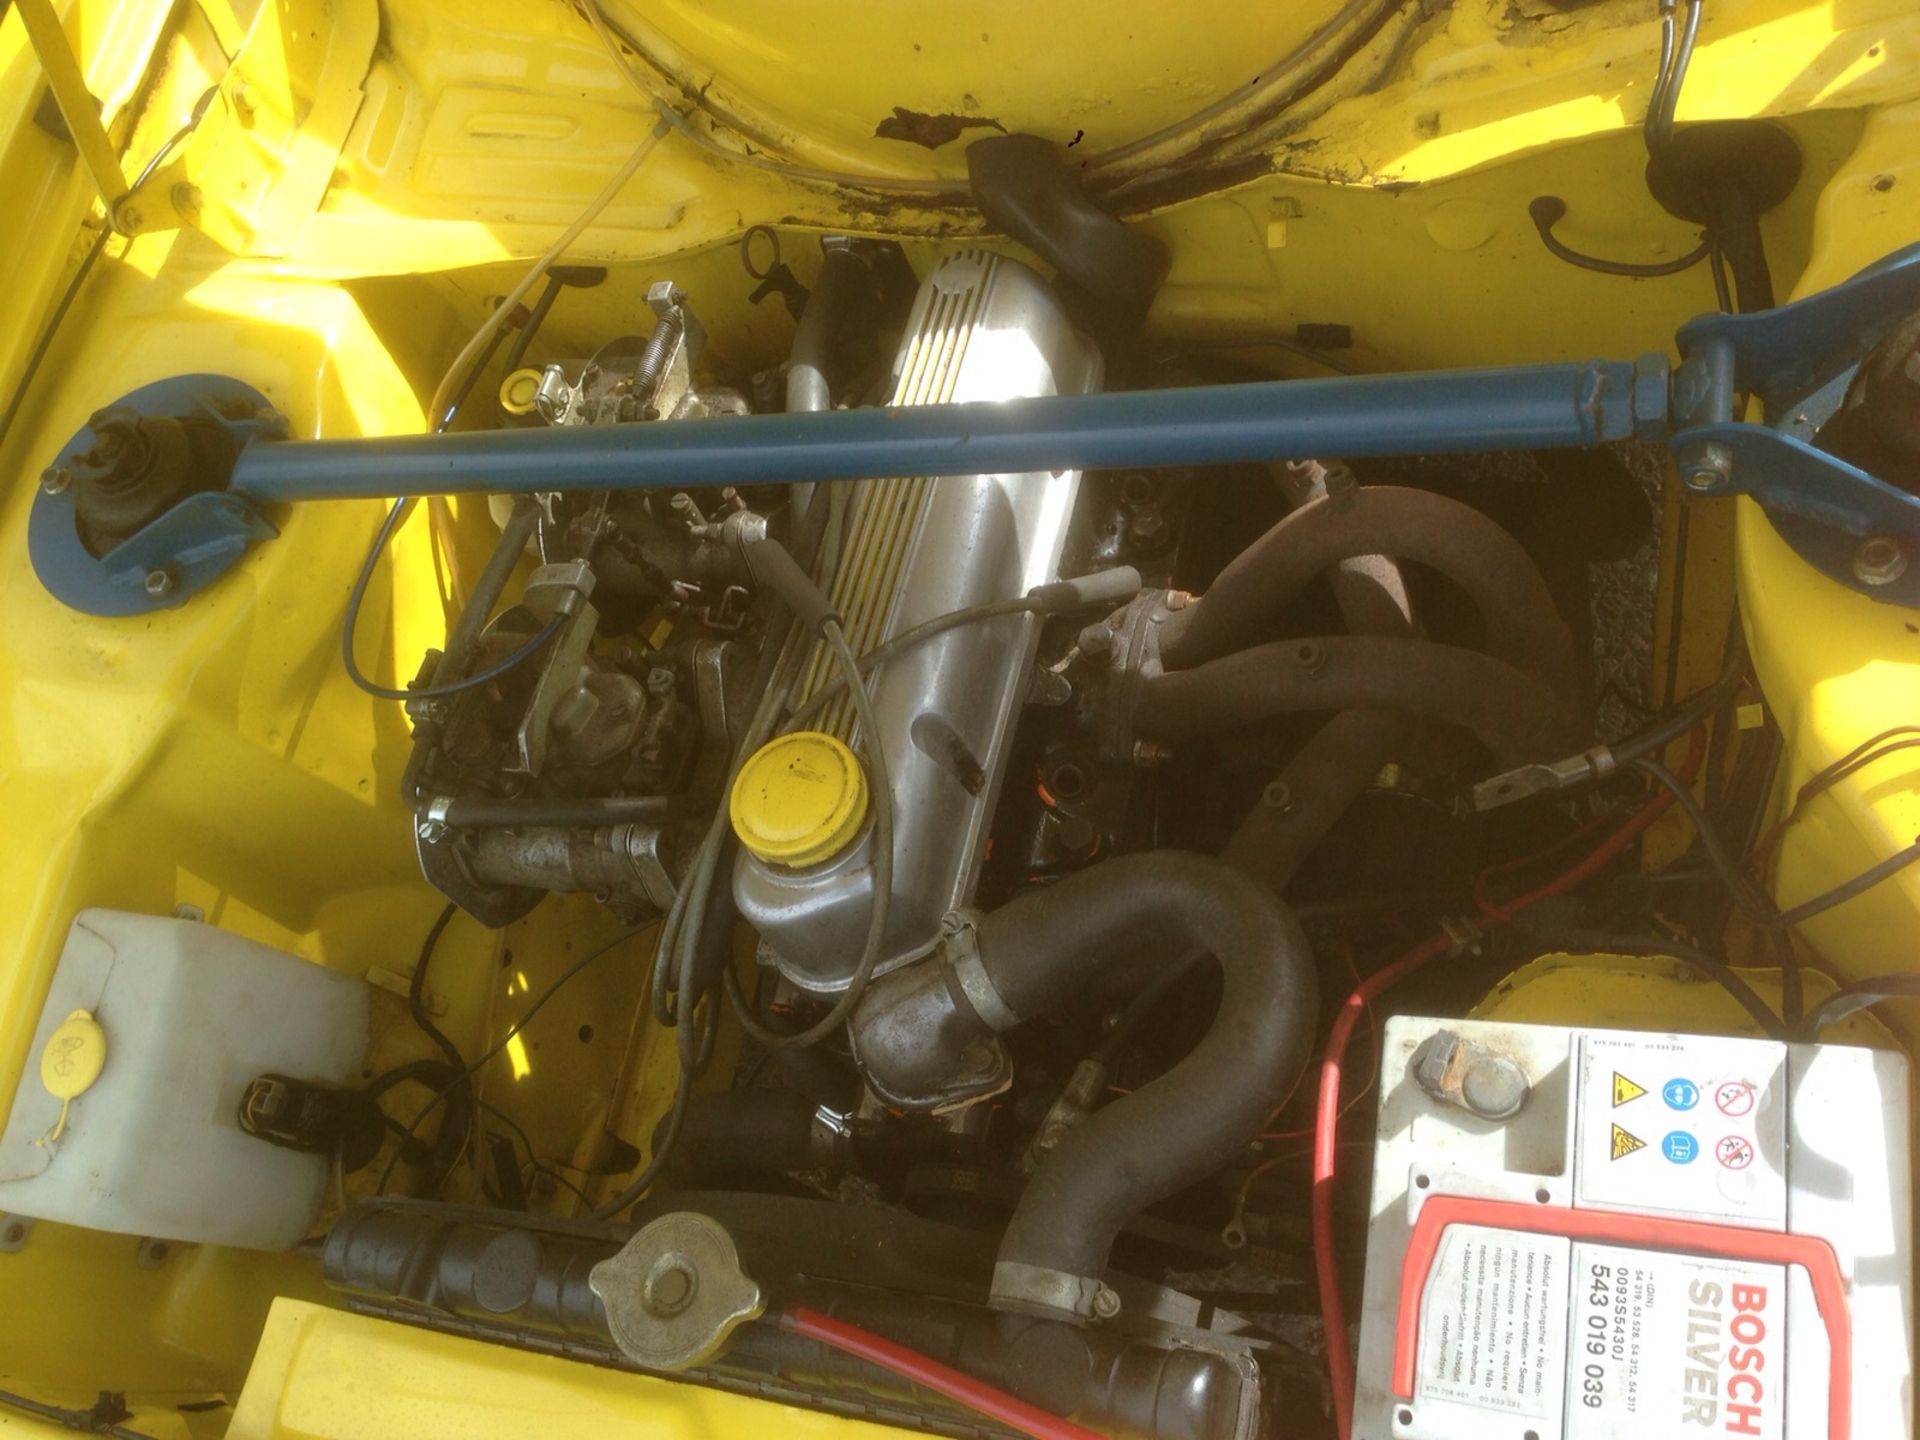 1979/T Ford Escort mk2 1600 Sport - in Signal yellow -  UK car  (545 miles) since rebuild - Image 30 of 54